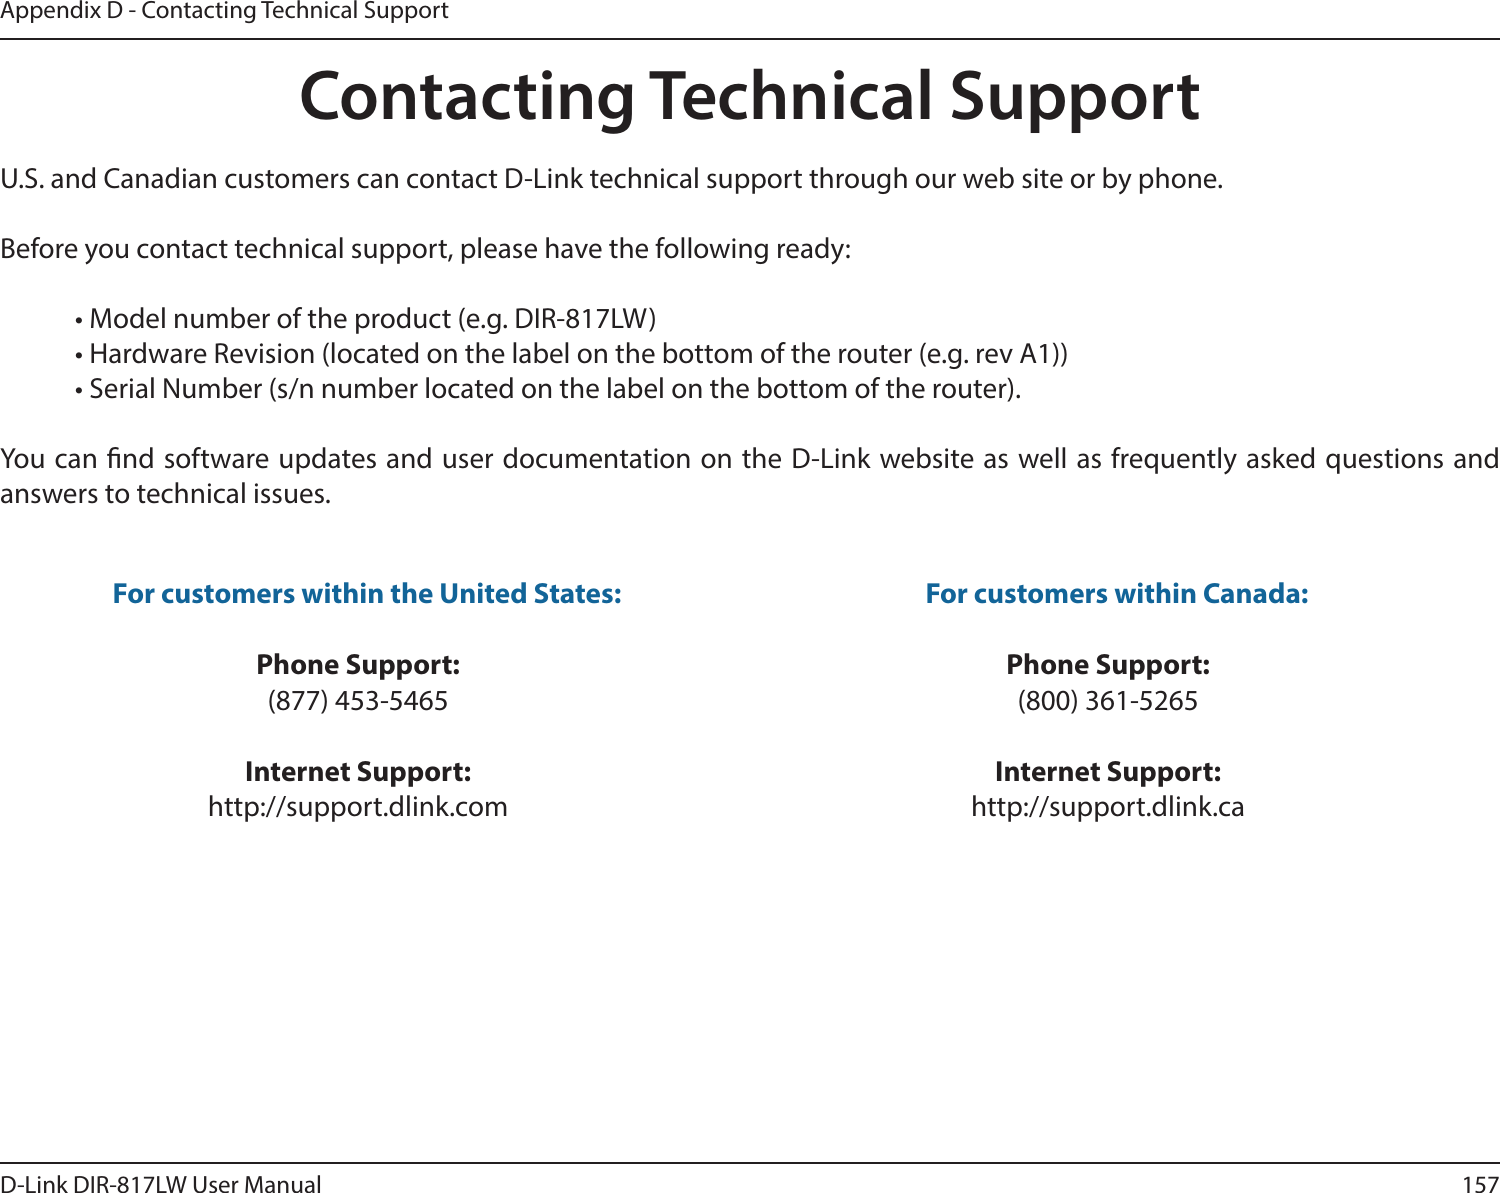 157D-Link DIR-817LW User ManualAppendix D - Contacting Technical SupportContacting Technical SupportU.S. and Canadian customers can contact D-Link technical support through our web site or by phone.Before you contact technical support, please have the following ready:  • Model number of the product (e.g. DIR-817LW)  • Hardware Revision (located on the label on the bottom of the router (e.g. rev A1))  • Serial Number (s/n number located on the label on the bottom of the router). You can nd software updates and user documentation on the D-Link website as well as frequently asked questions and answers to technical issues.For customers within the United States: Phone Support:(877) 453-5465Internet Support:http://support.dlink.com For customers within Canada: Phone Support:(800) 361-5265Internet Support:http://support.dlink.ca 